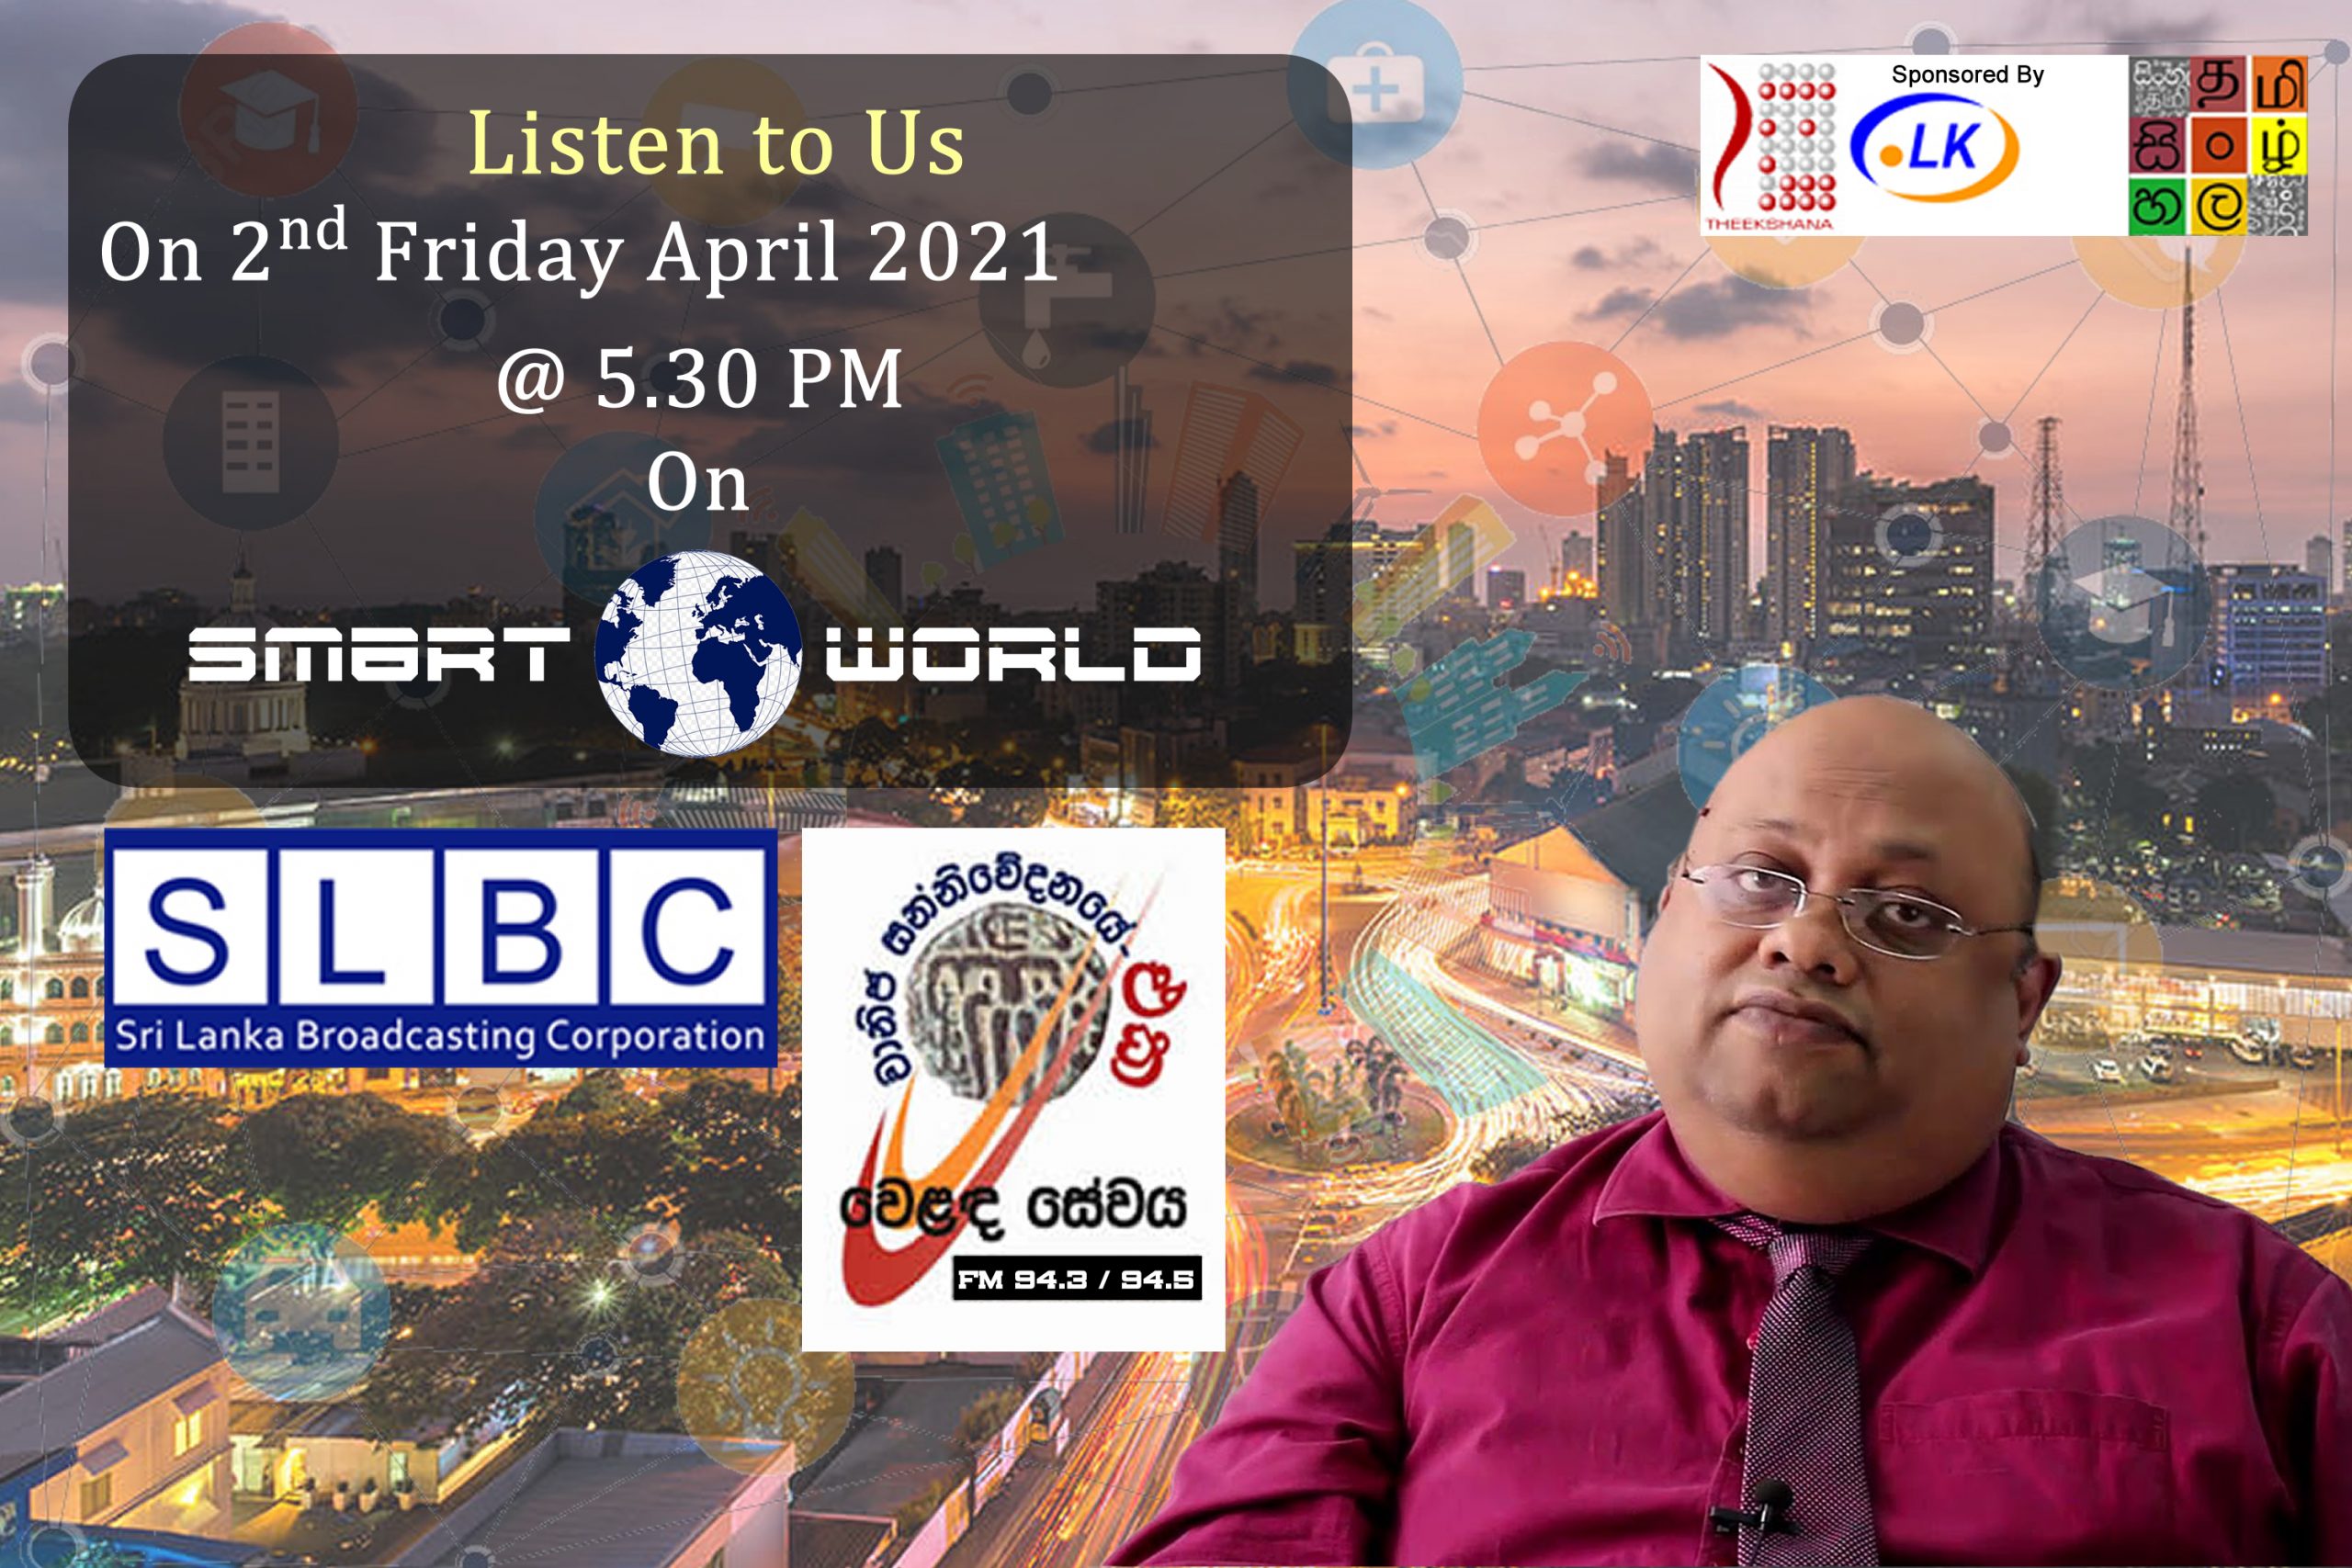 Listen to SLBC “Smart World” Program on 2nd April(Friday) at 5.30PM on Sinhala Commercial Service (FM 94.3 / 94.5). This programme will be proudly sponsored by .LK Domain Registry.